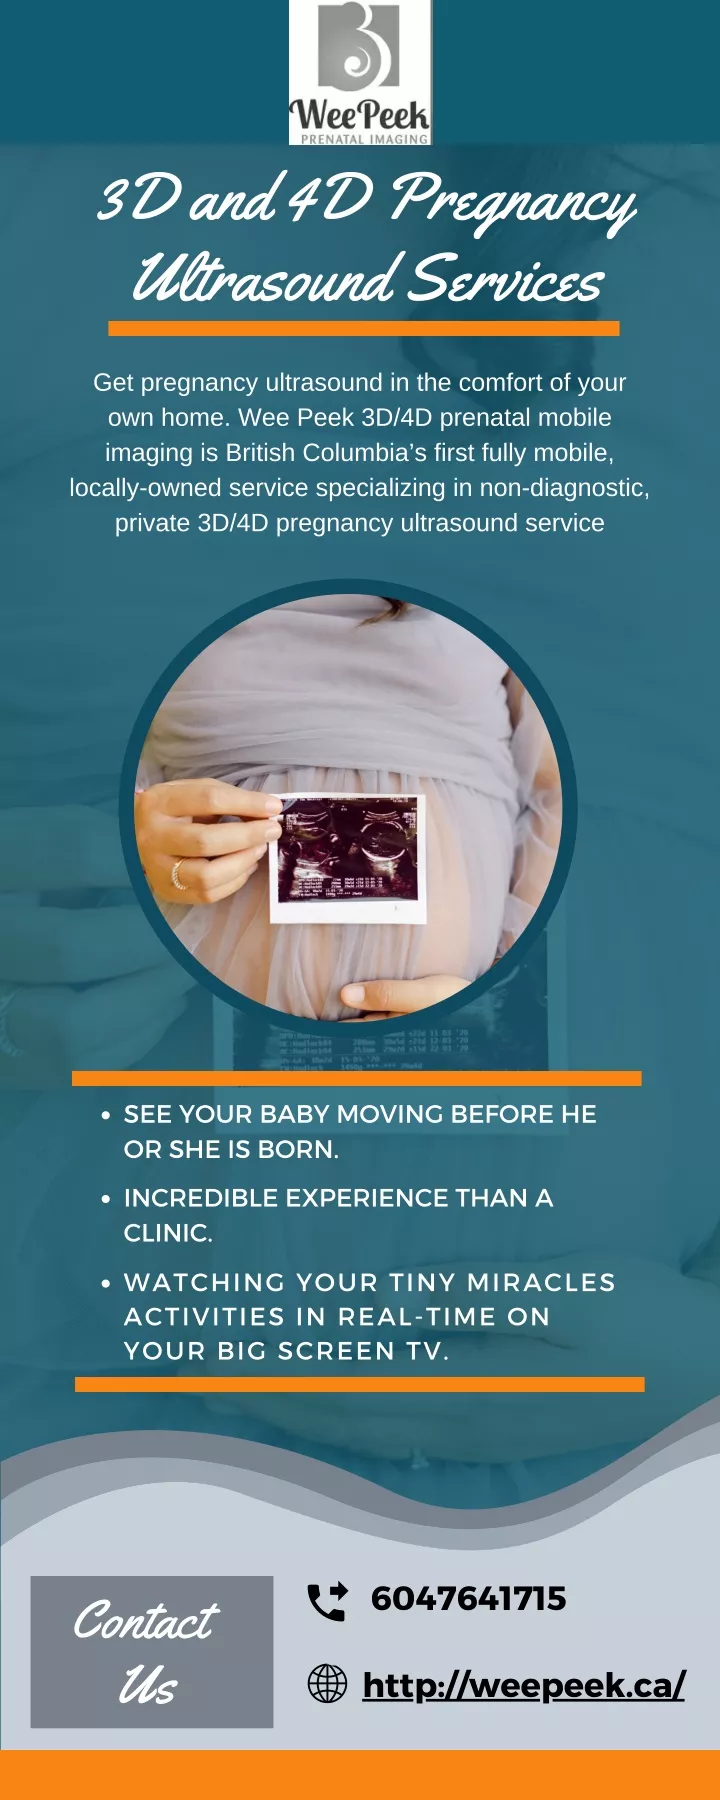 3d and 4d pregnancy ultrasound services